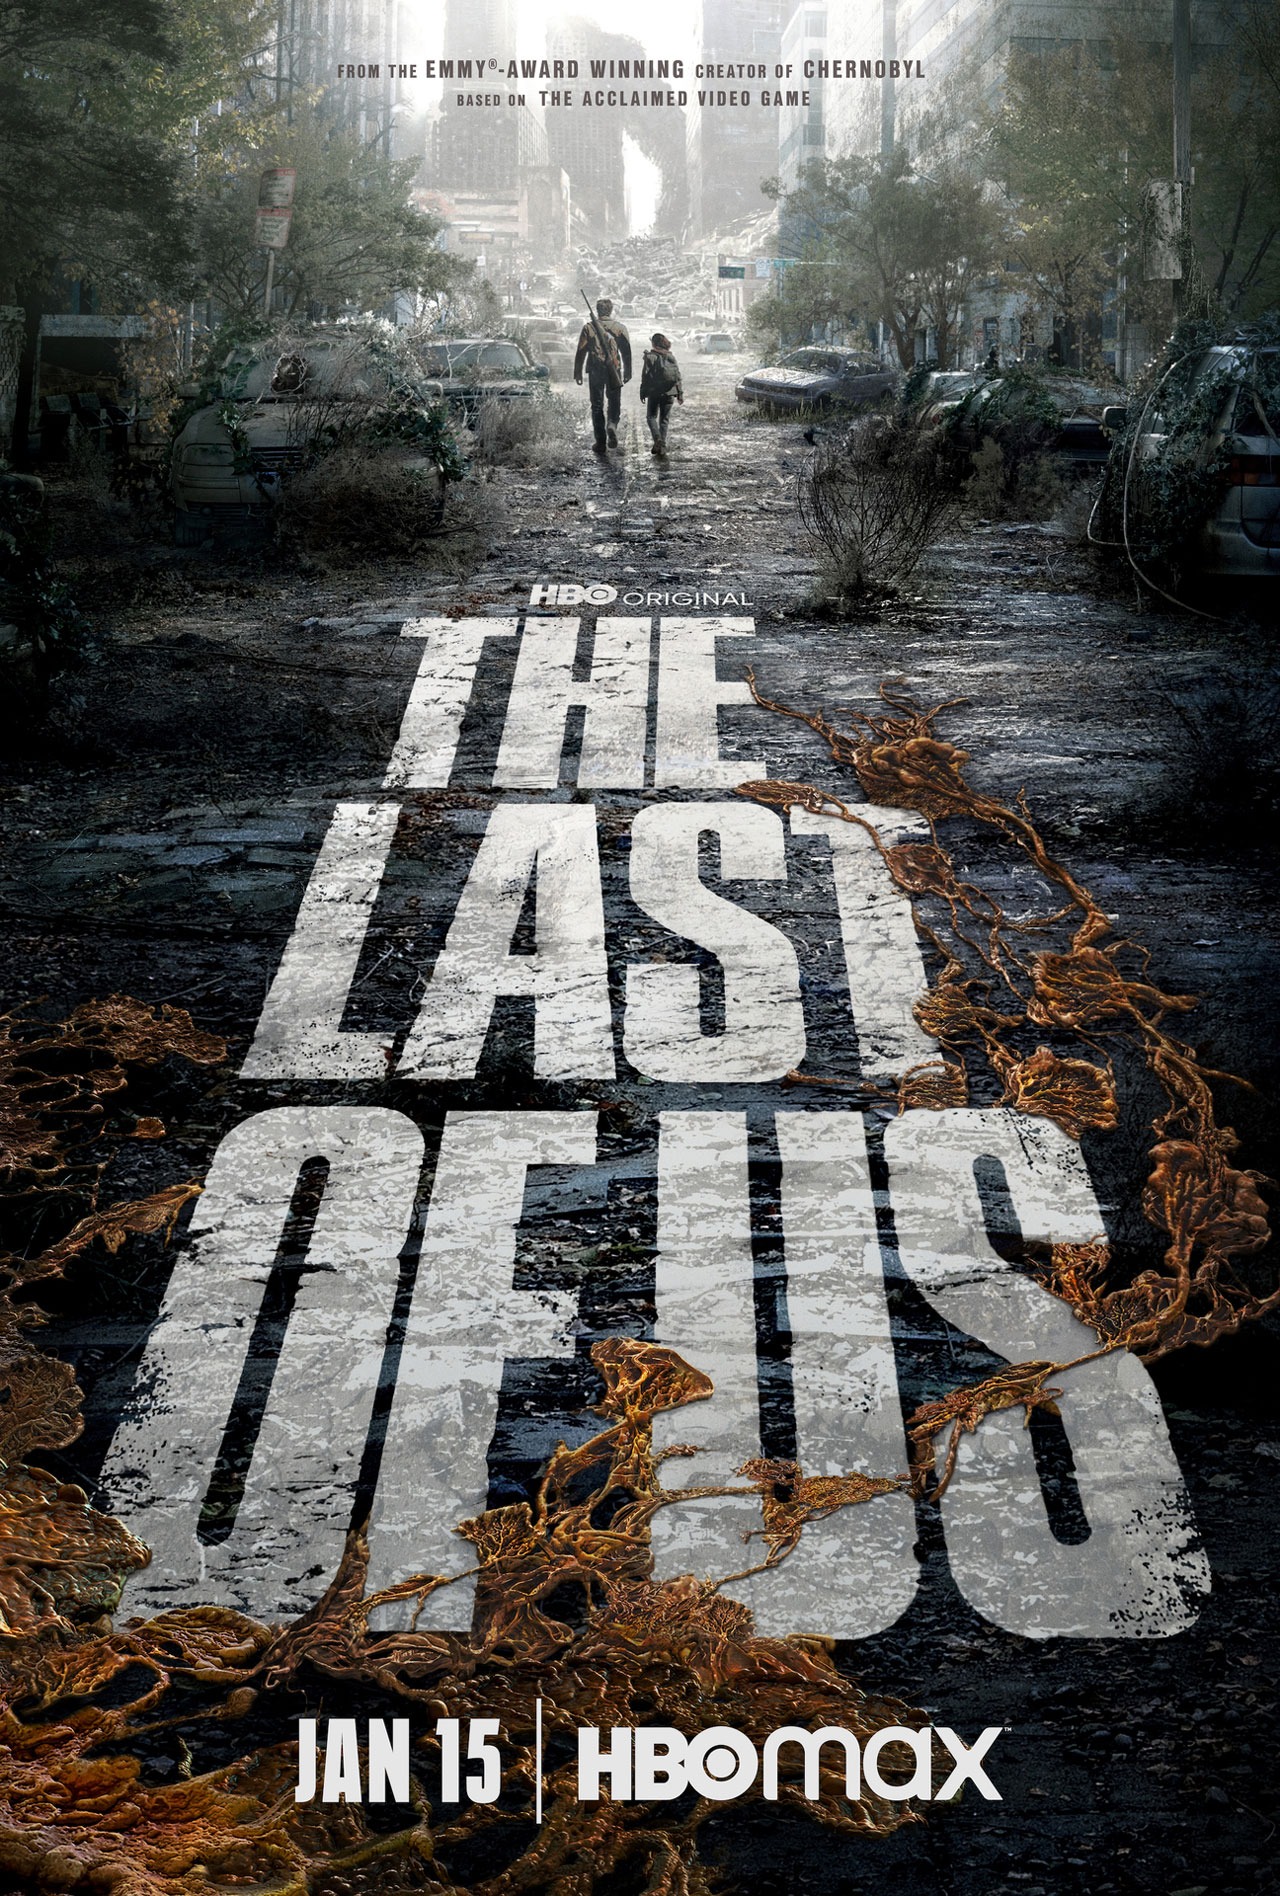 How classic was The Last of Us turned into a movie (1)